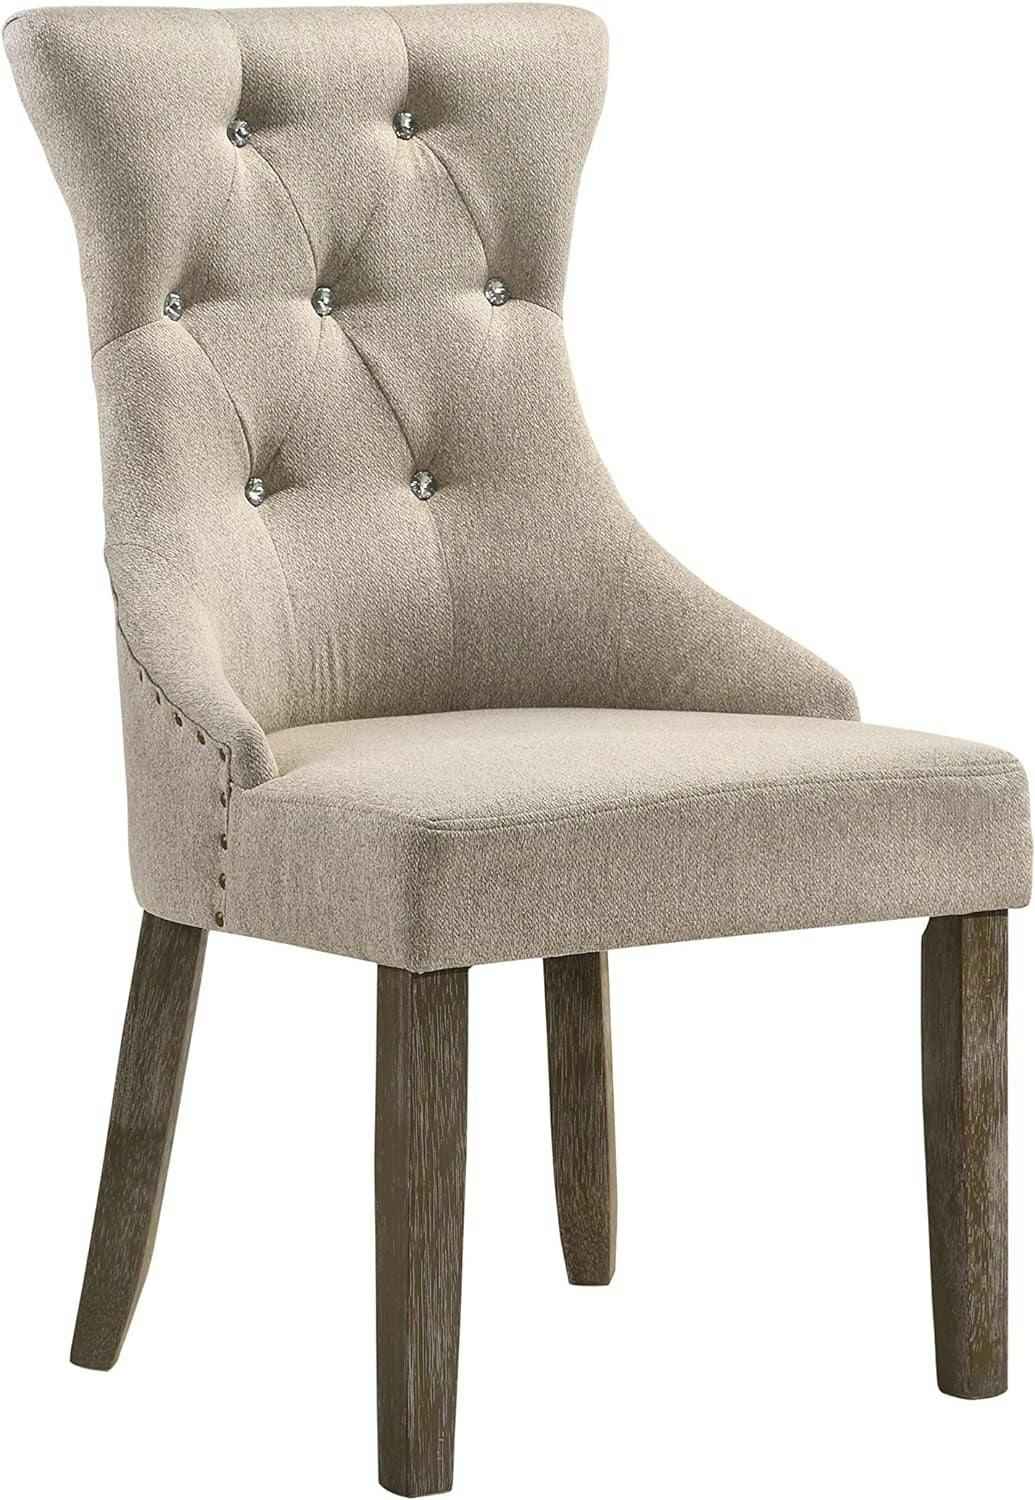 Elegant Beige Upholstered Dining Side Chair with Reclaimed Gray Wood Frame